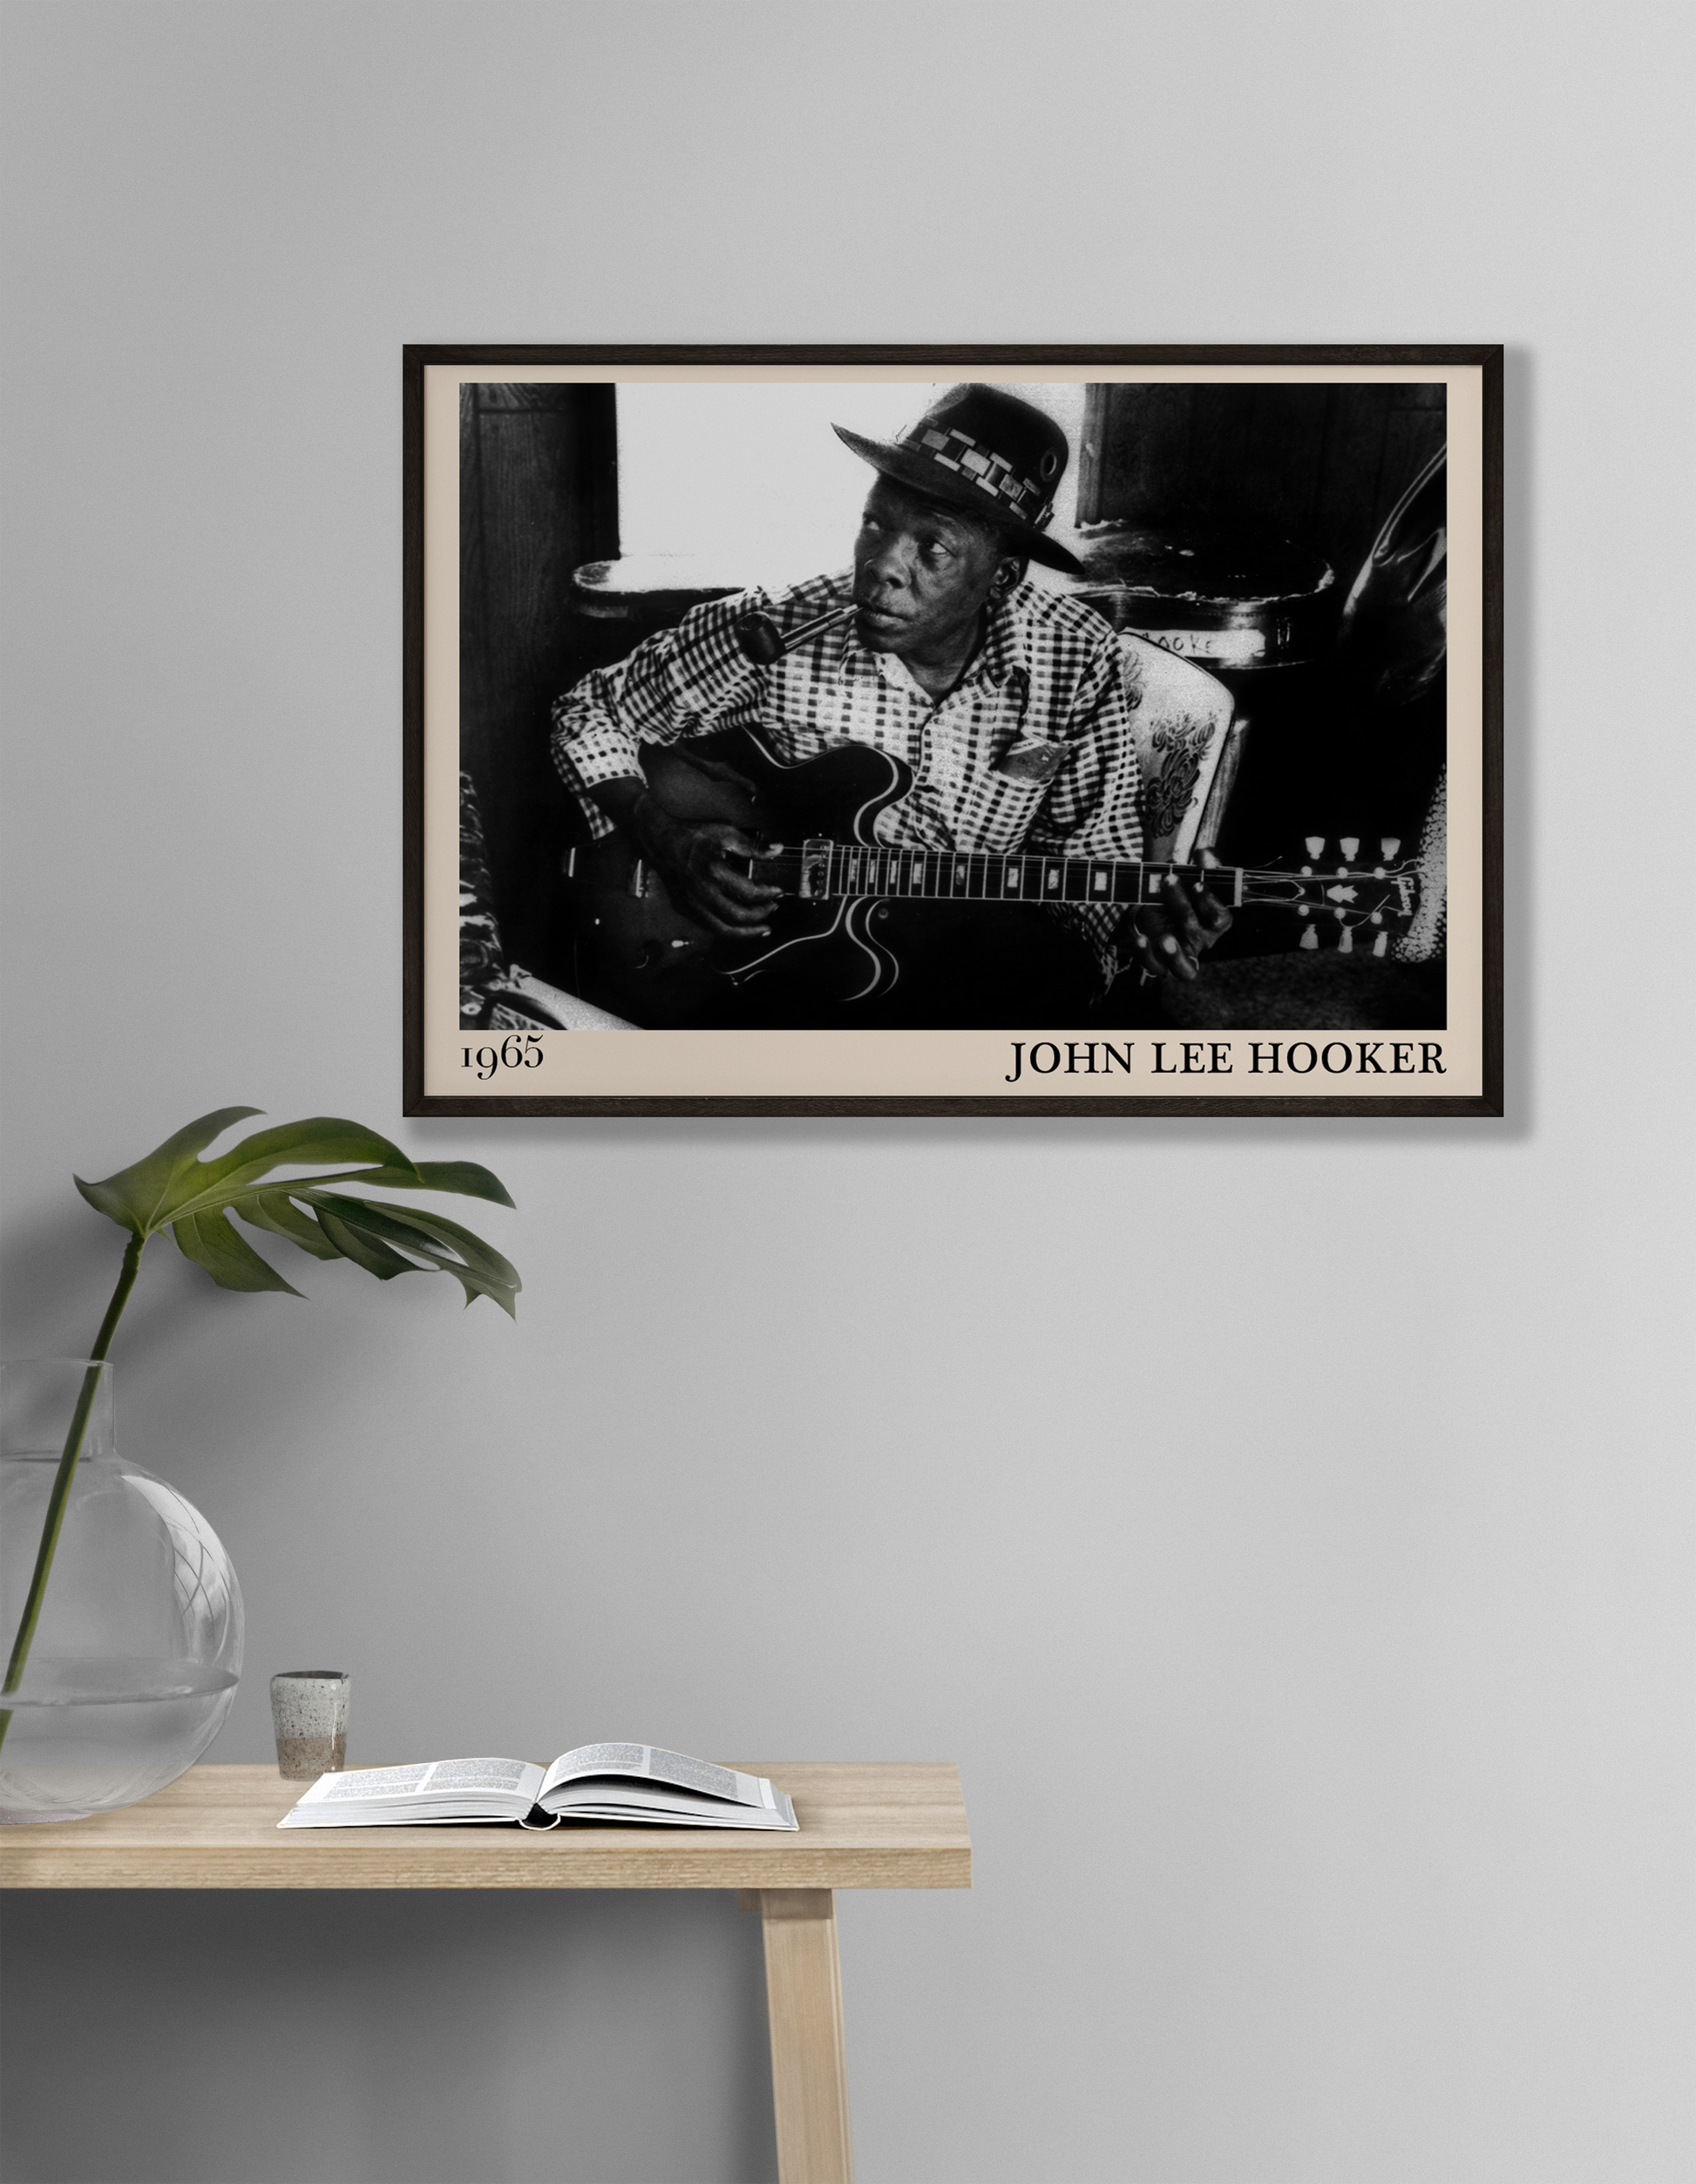 John Lee Hooker blues print hanging against a white wall in a study